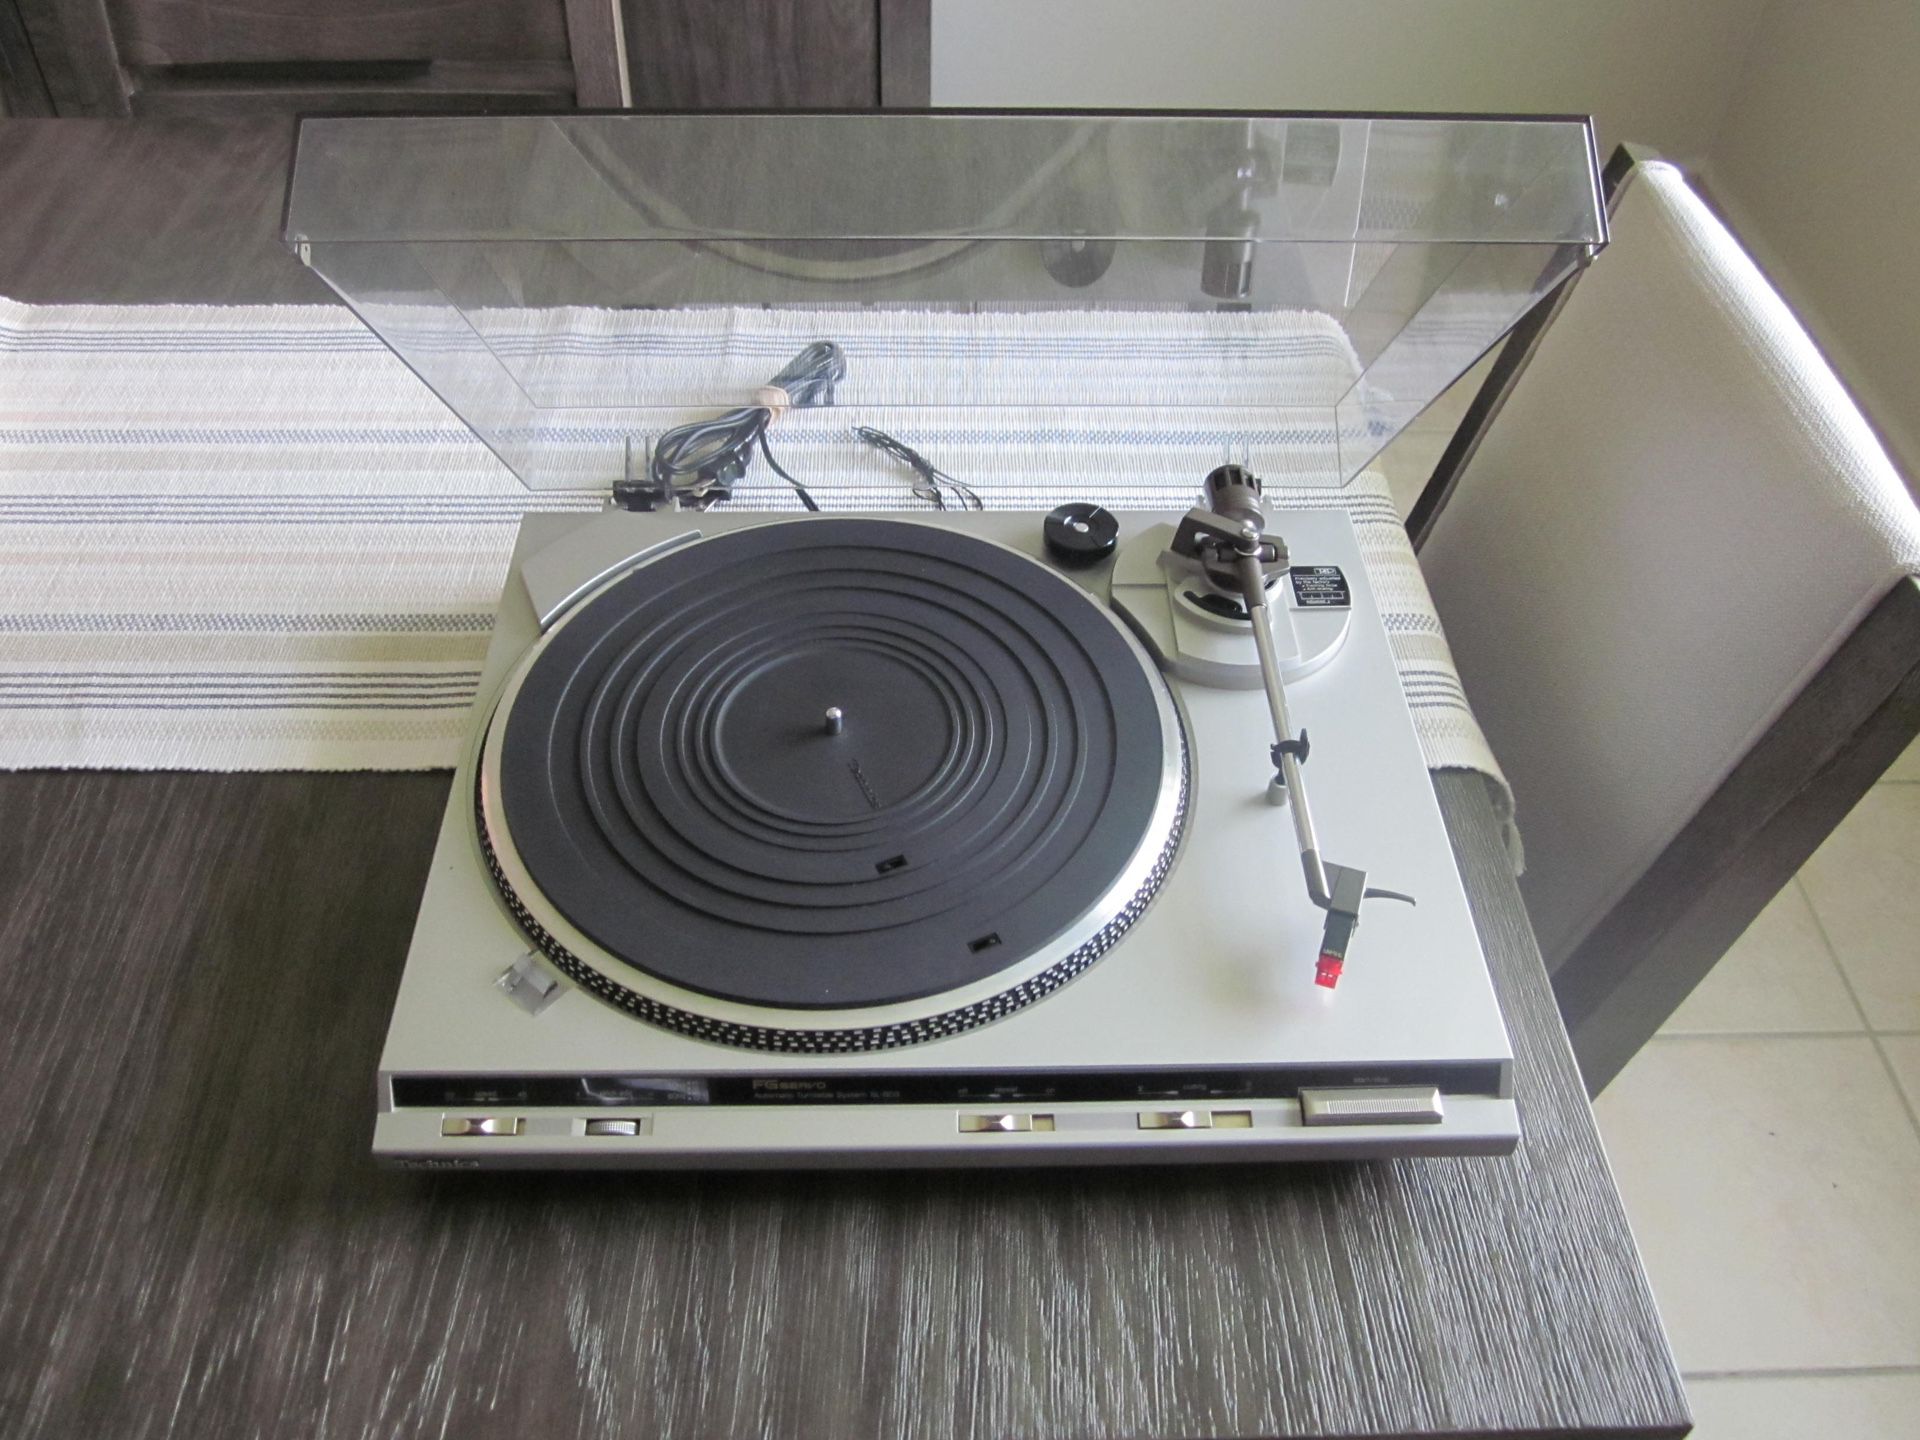 Technics Turntable With High Quality Empire Cartridge And Stylus . Excellent Condition . Near Mint . Hard To Find One In This Condition . Must see . 